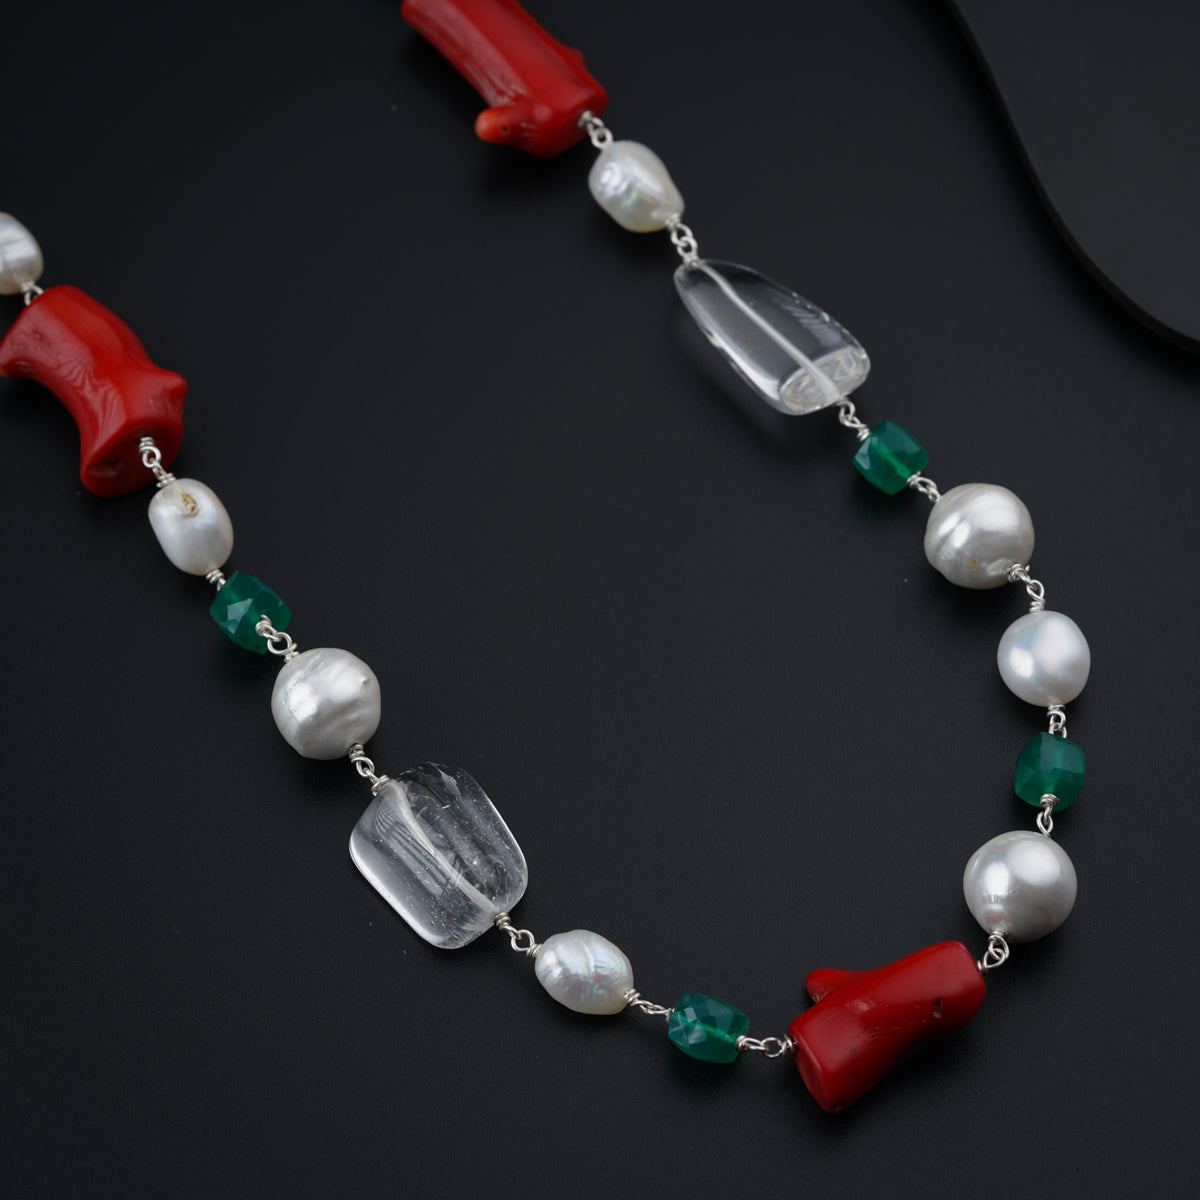 a necklace with a red, white, and green bead